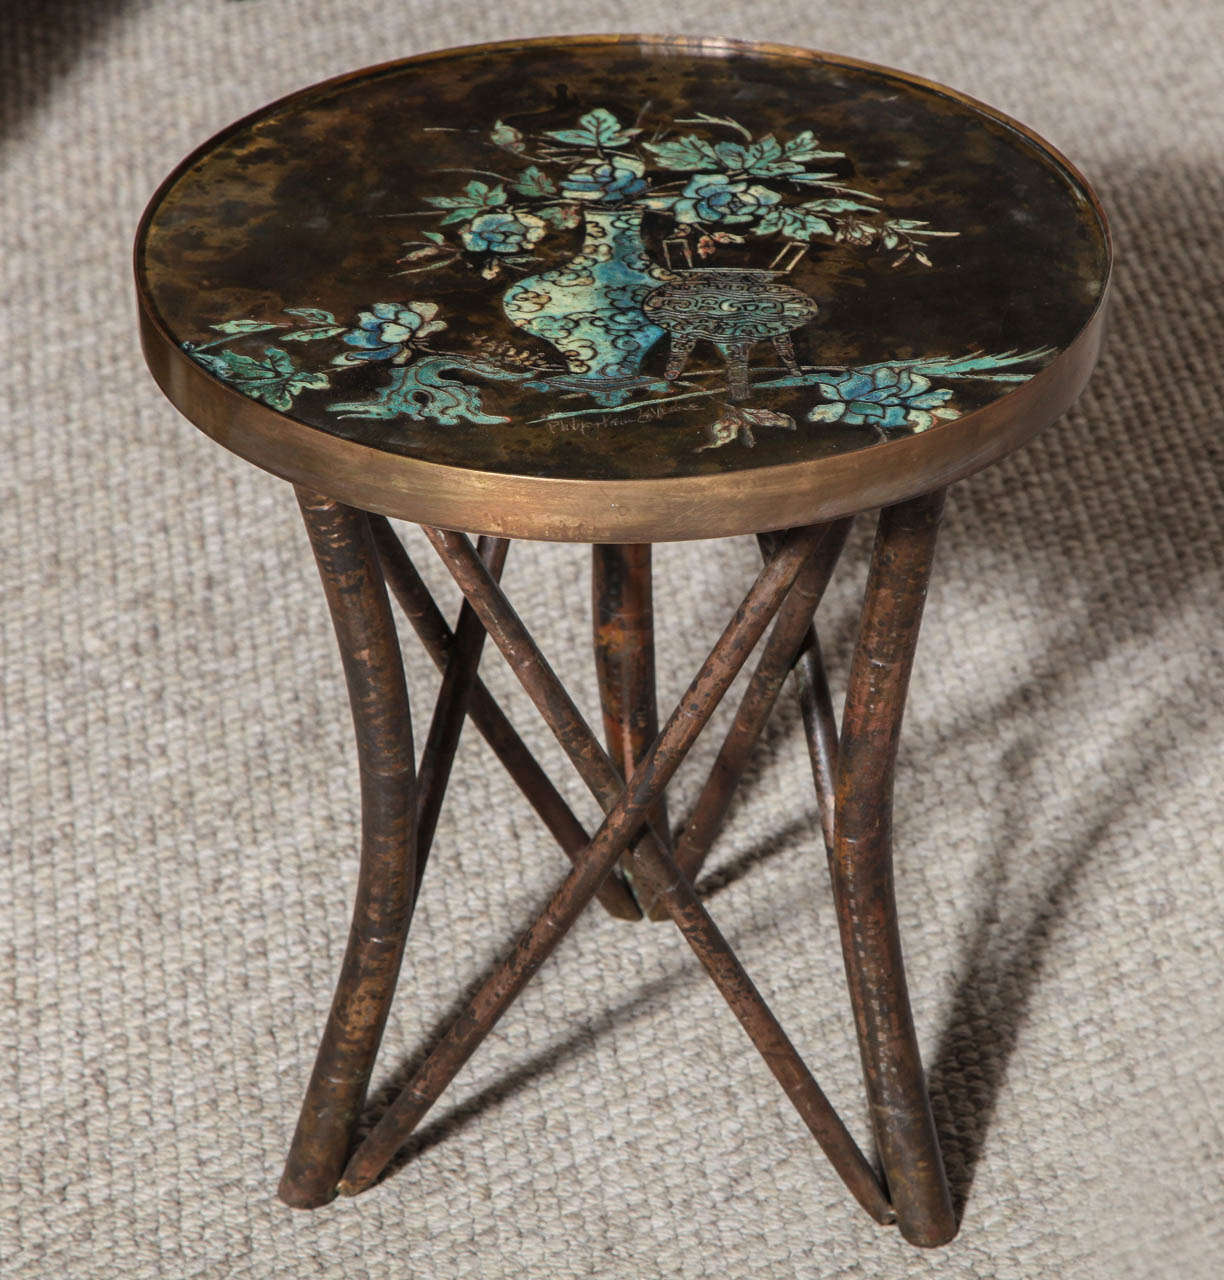 Elegant, studio-made side table of bronze with circular top, and architectural base.  Top is decorated with torched background and etched and enameled still life image.  Signed on surface of top.